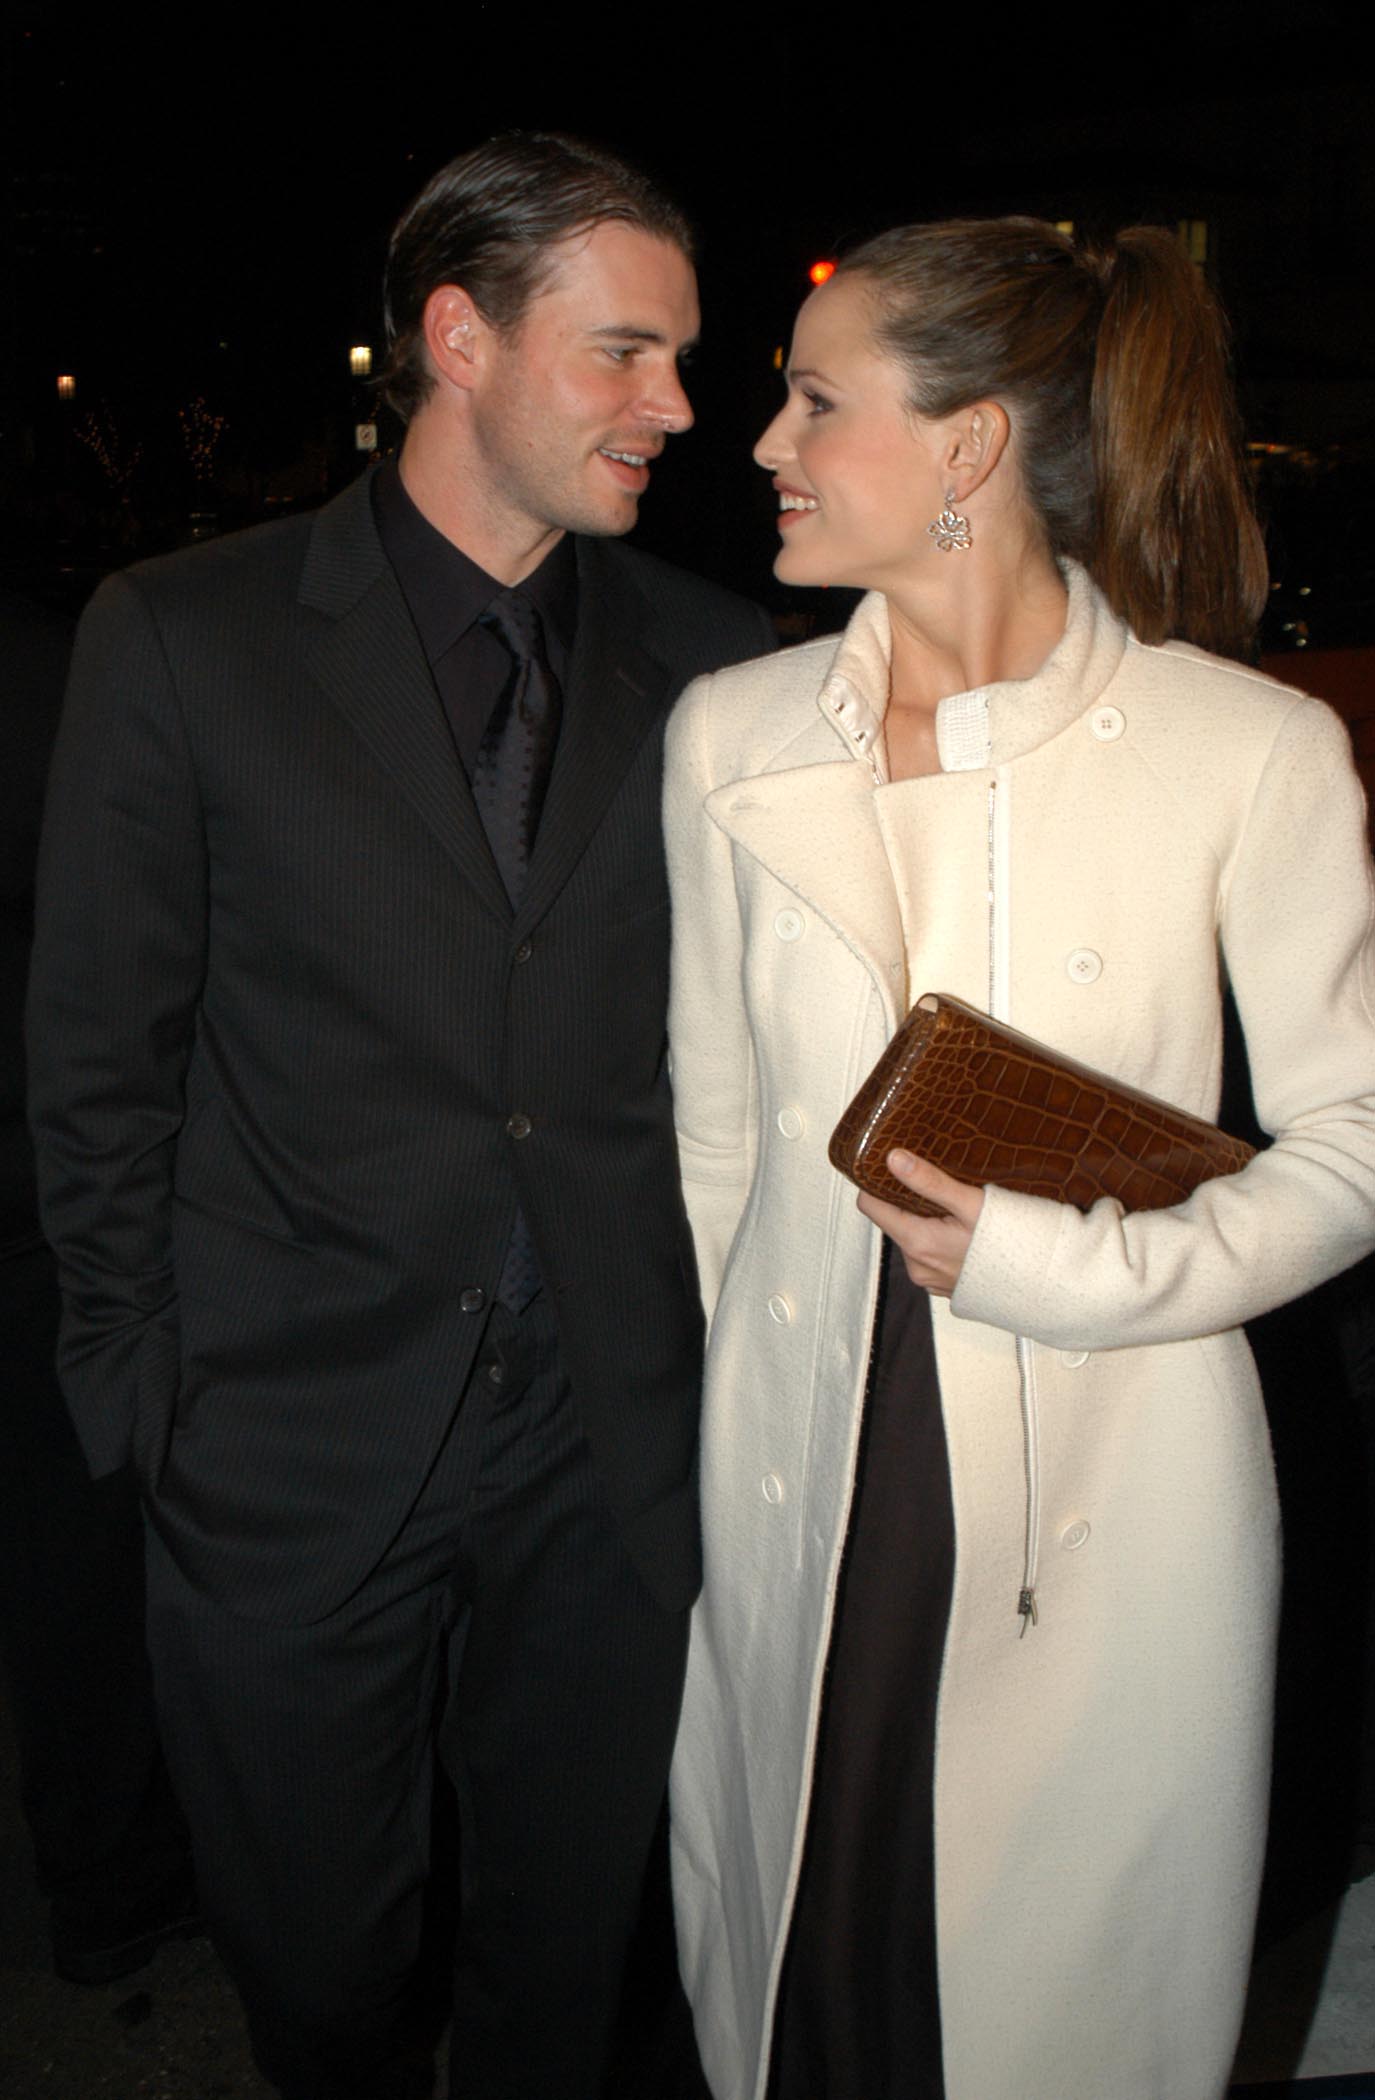 Scott Foley and Jennifer Garner at the premiere of "Catch Me If You Can," 2002 | Source: Getty Images